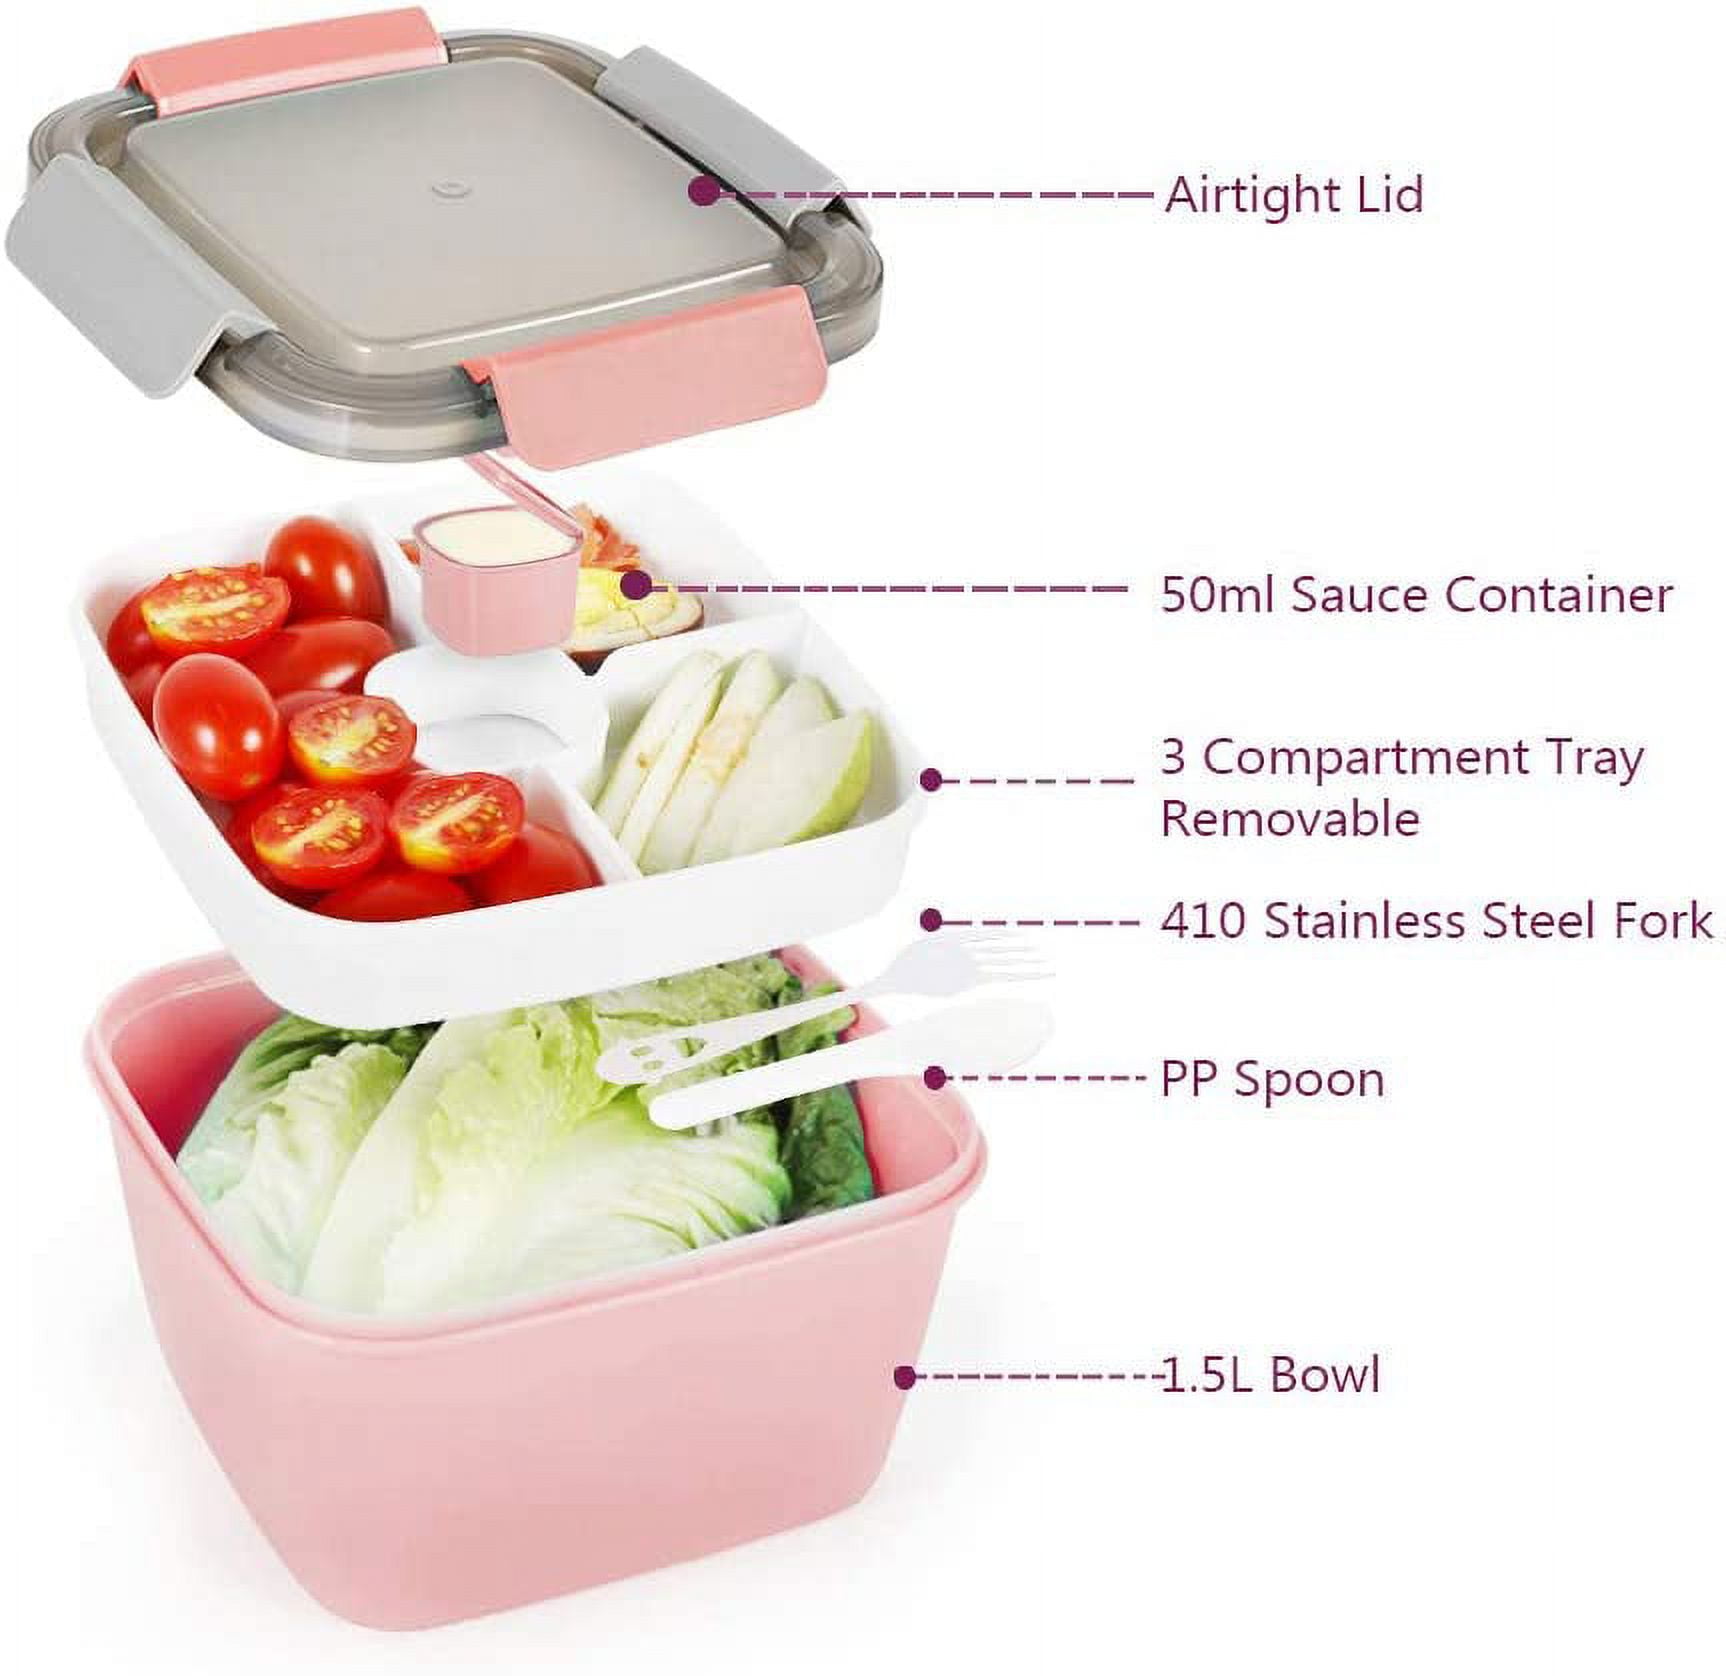 Salad lunch container to go, 37oz/52oz salad bowl with 3